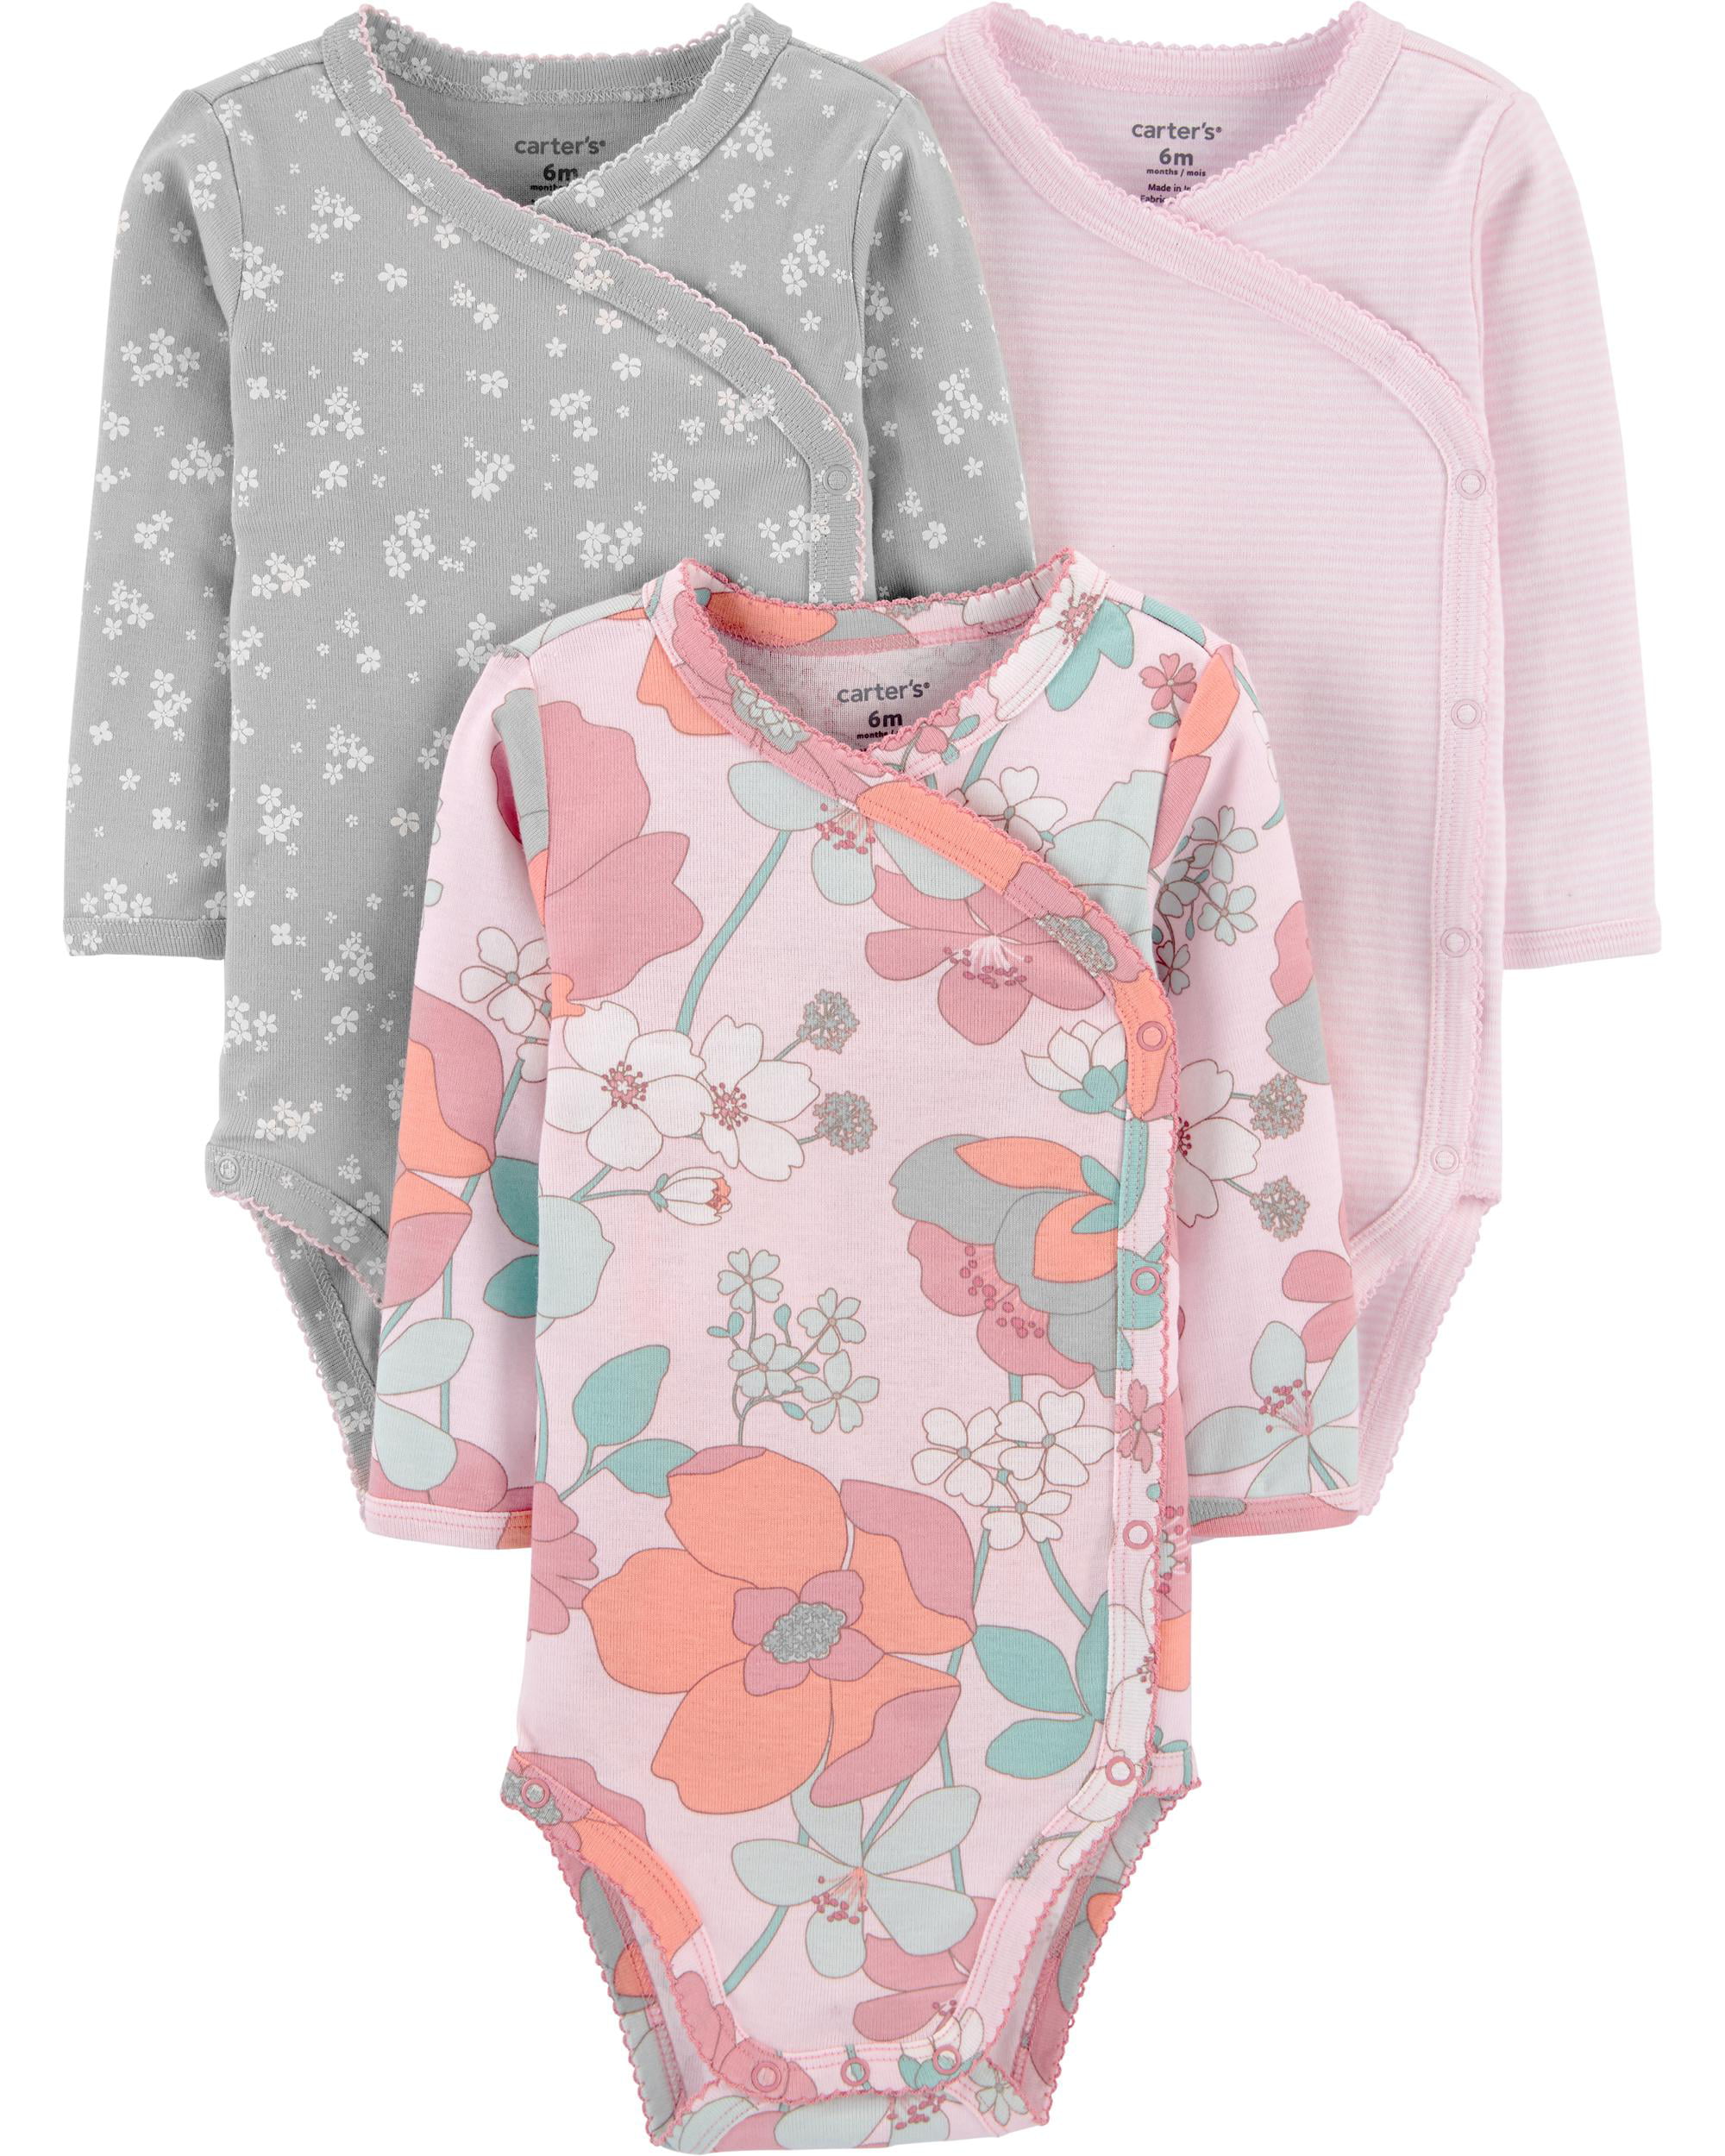 Carter's Carter's Baby Girls 3Pack SideSnap Bodysuits (NB, Floral)